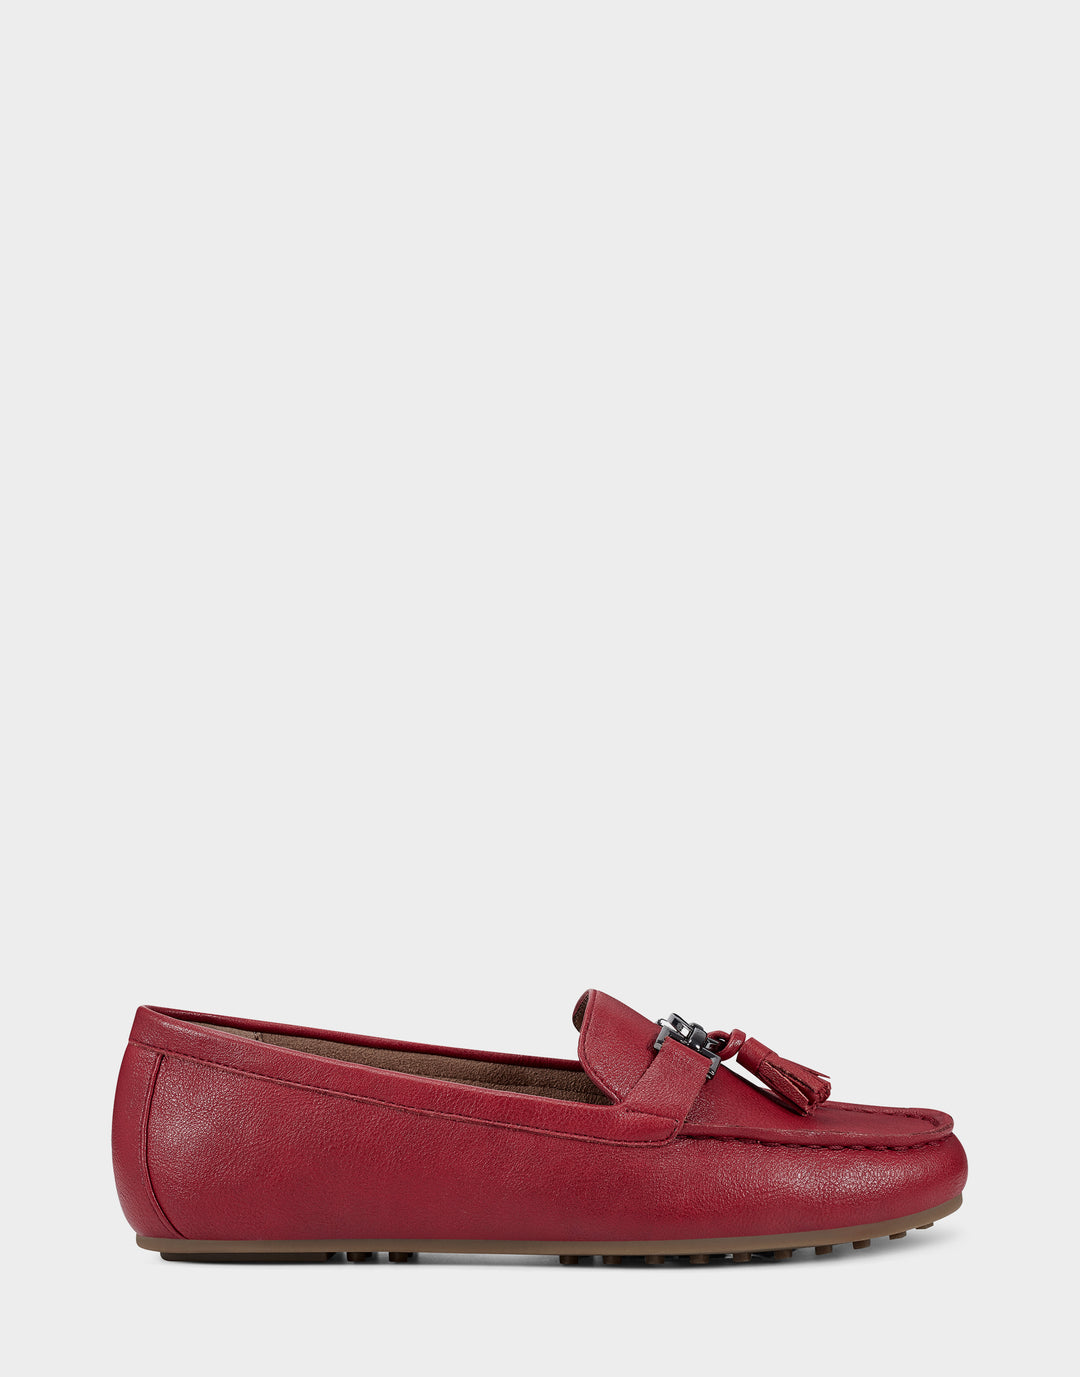 Deanna - comfortable women's loafers in red